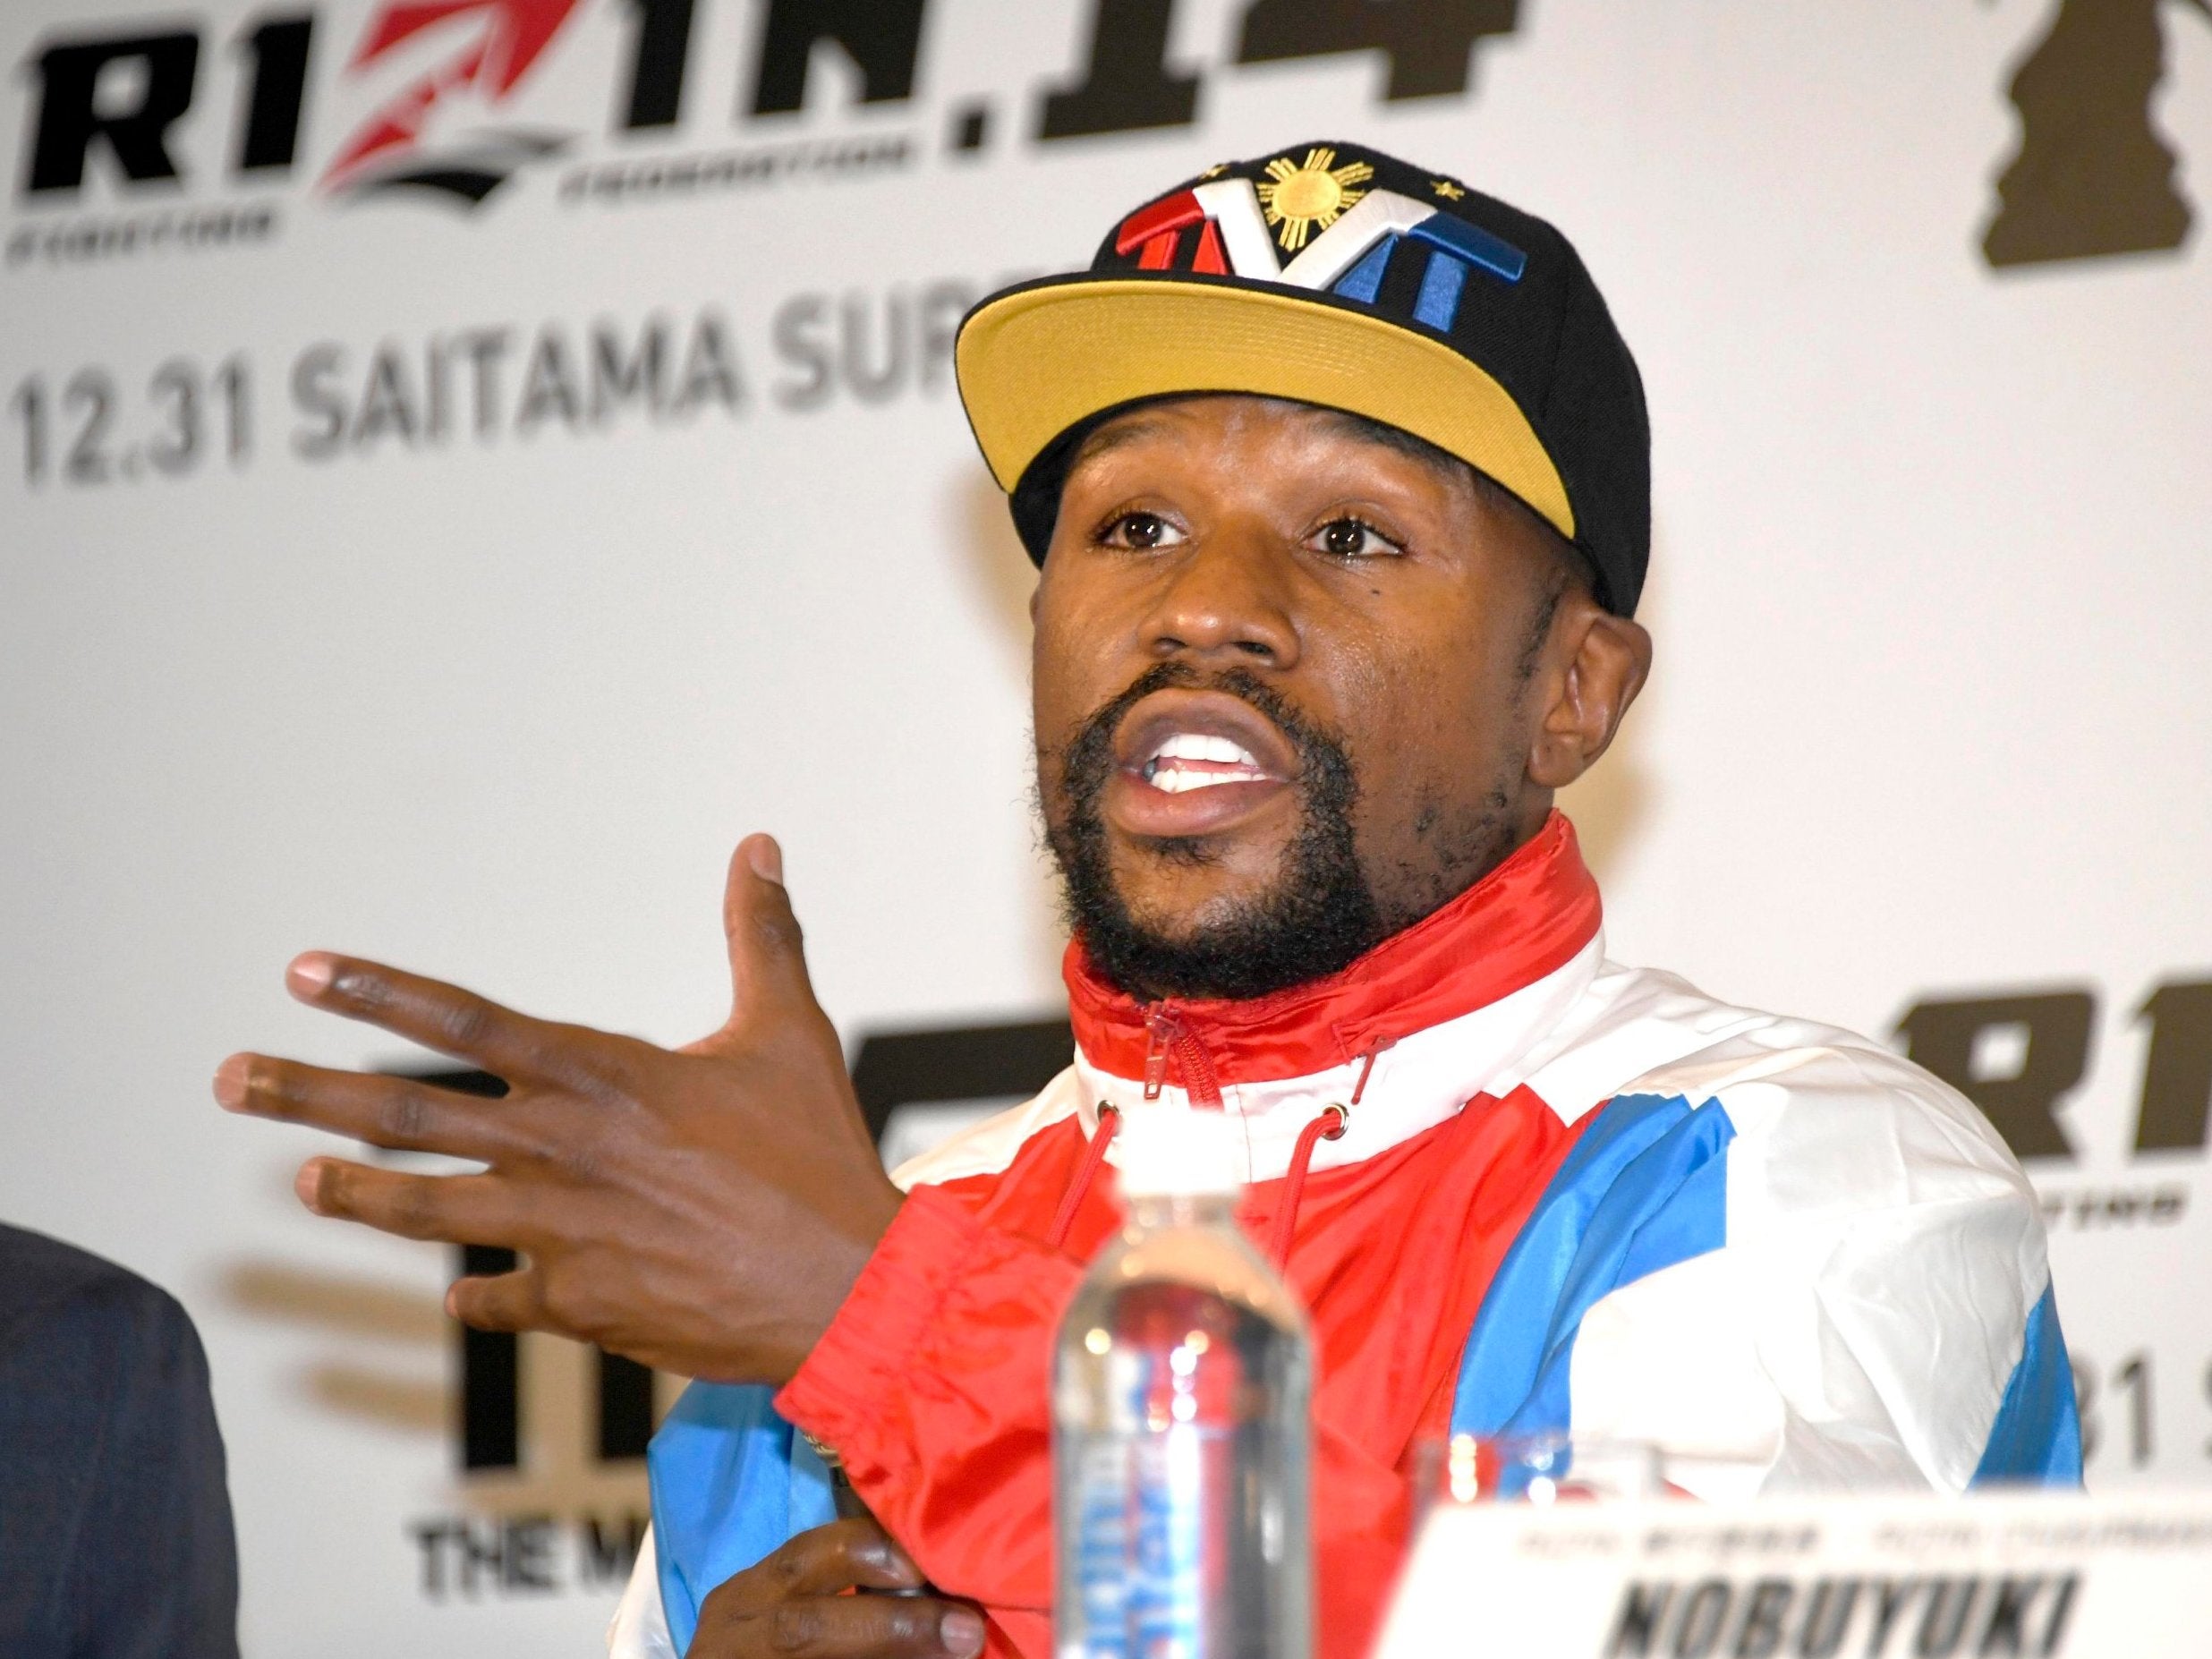 Mayweather speaks at the announcement of his latest fight